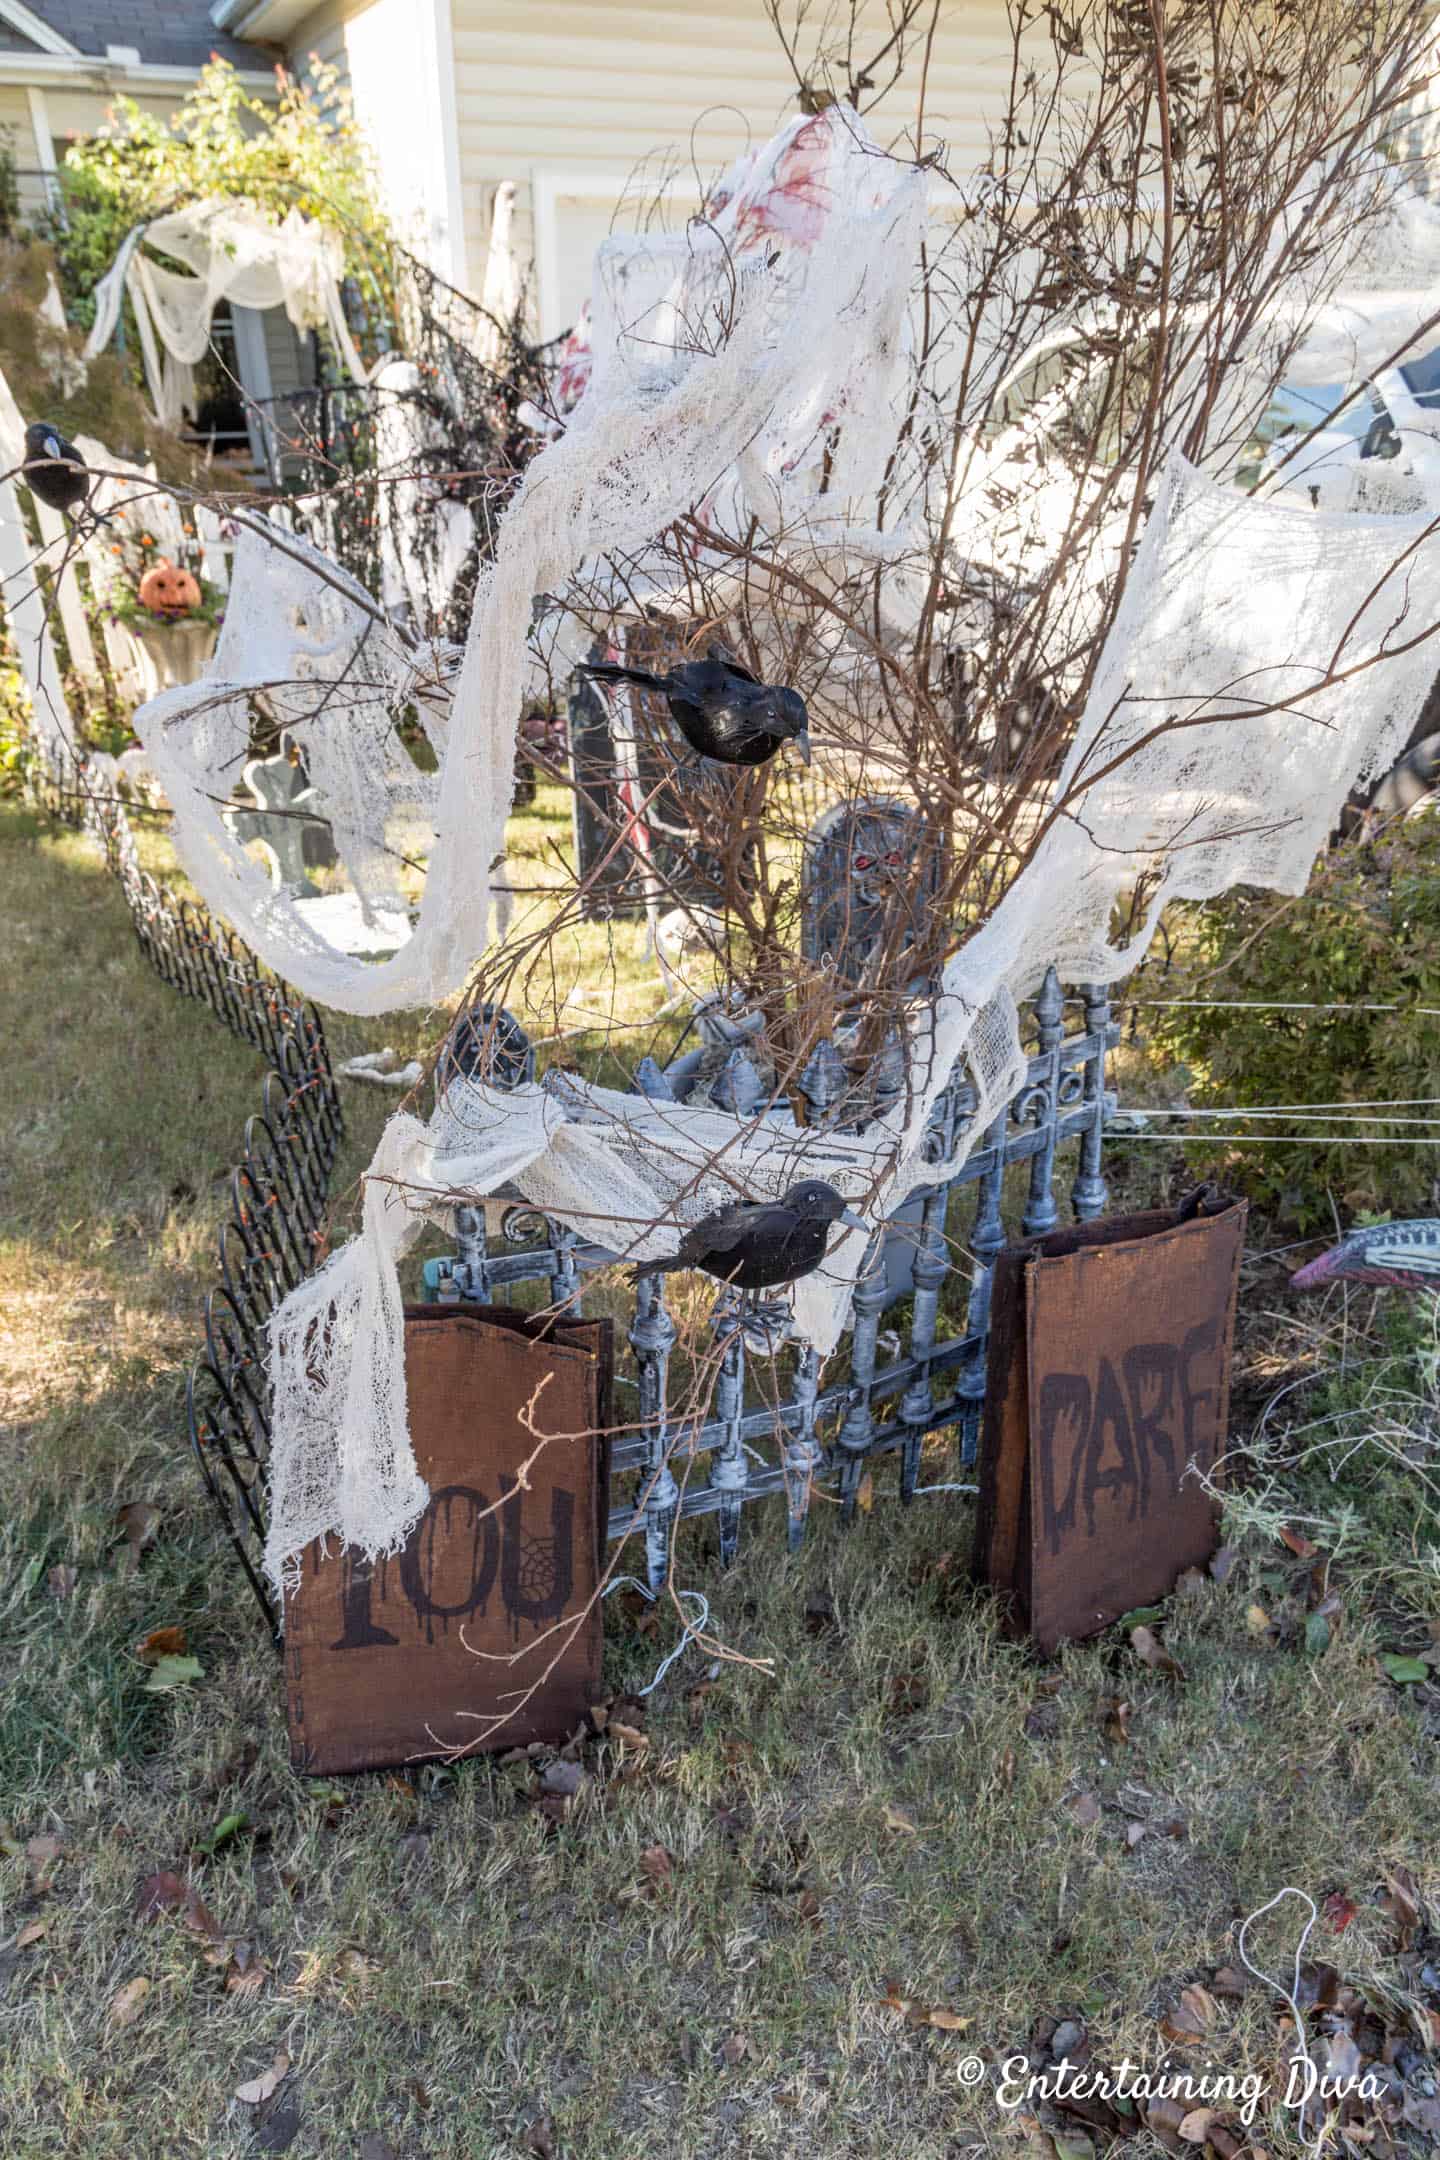 Creepy cloth and stuffed crows in some dead branches at the corner of a Halloween cemetery